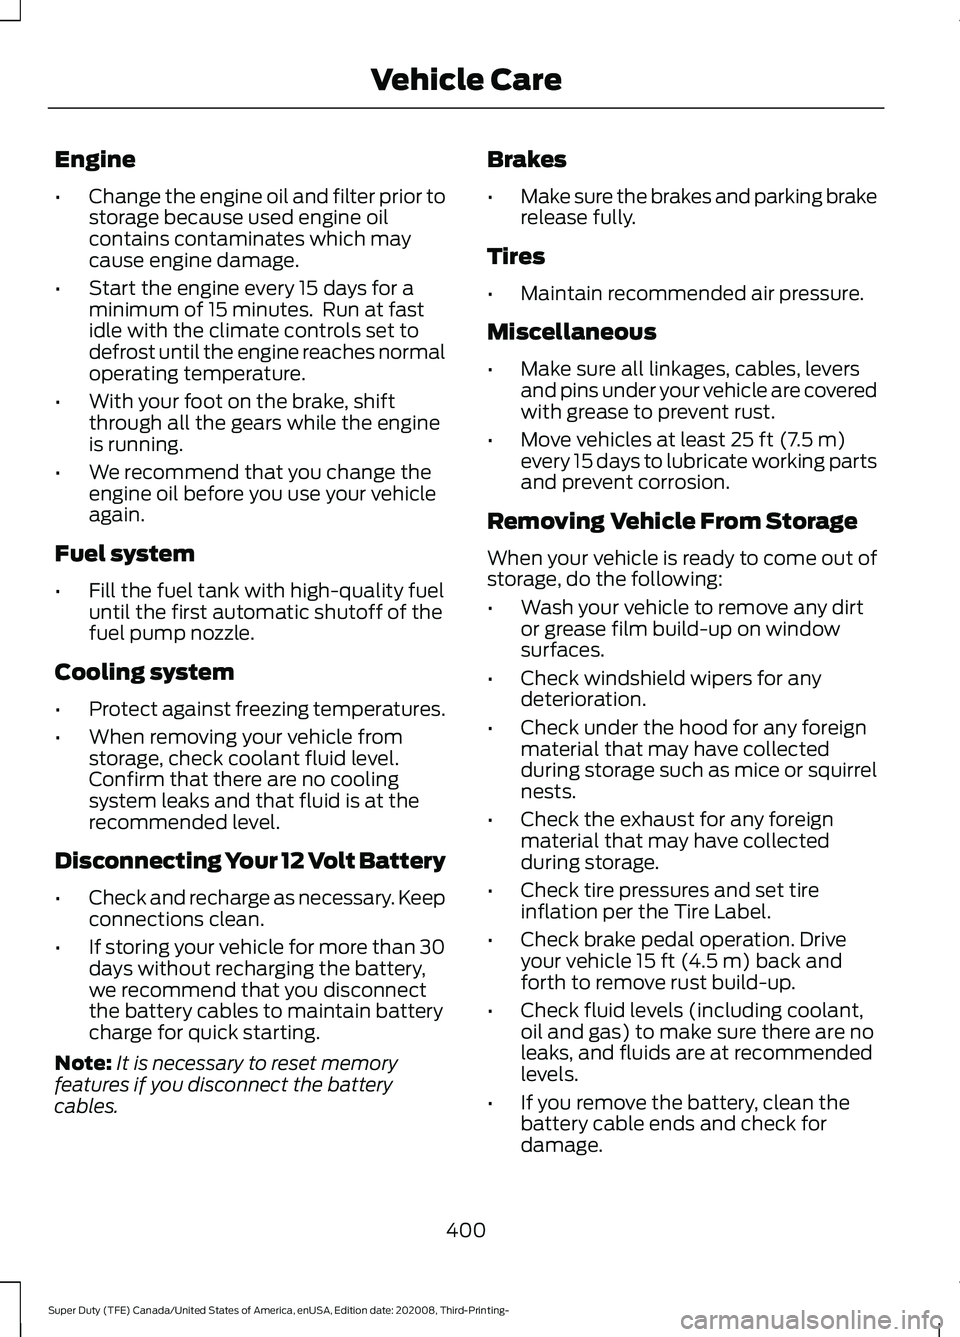 FORD F-250 2021  Owners Manual Engine
•
Change the engine oil and filter prior to
storage because used engine oil
contains contaminates which may
cause engine damage.
• Start the engine every 15 days for a
minimum of 15 minutes